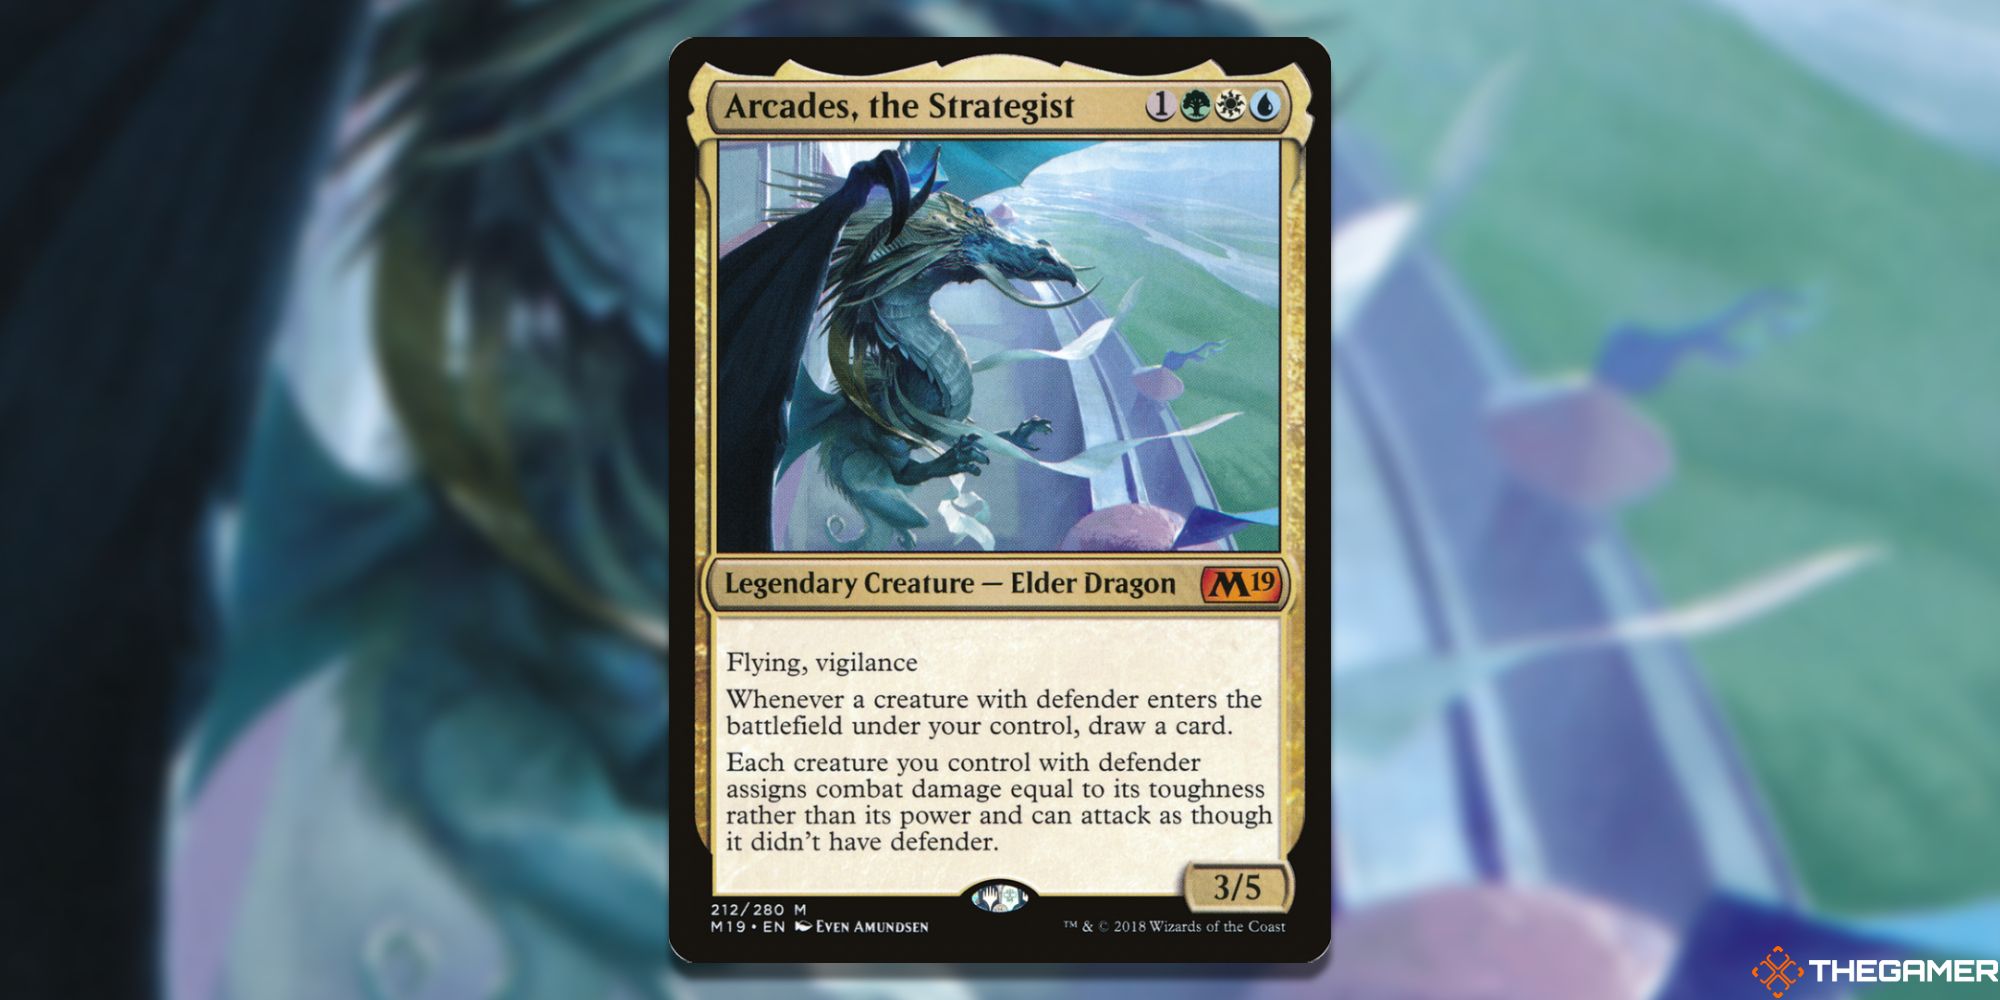 Image of the Arcades, The Strategist card in Magic: The Gathering, with art by Even Amundsen